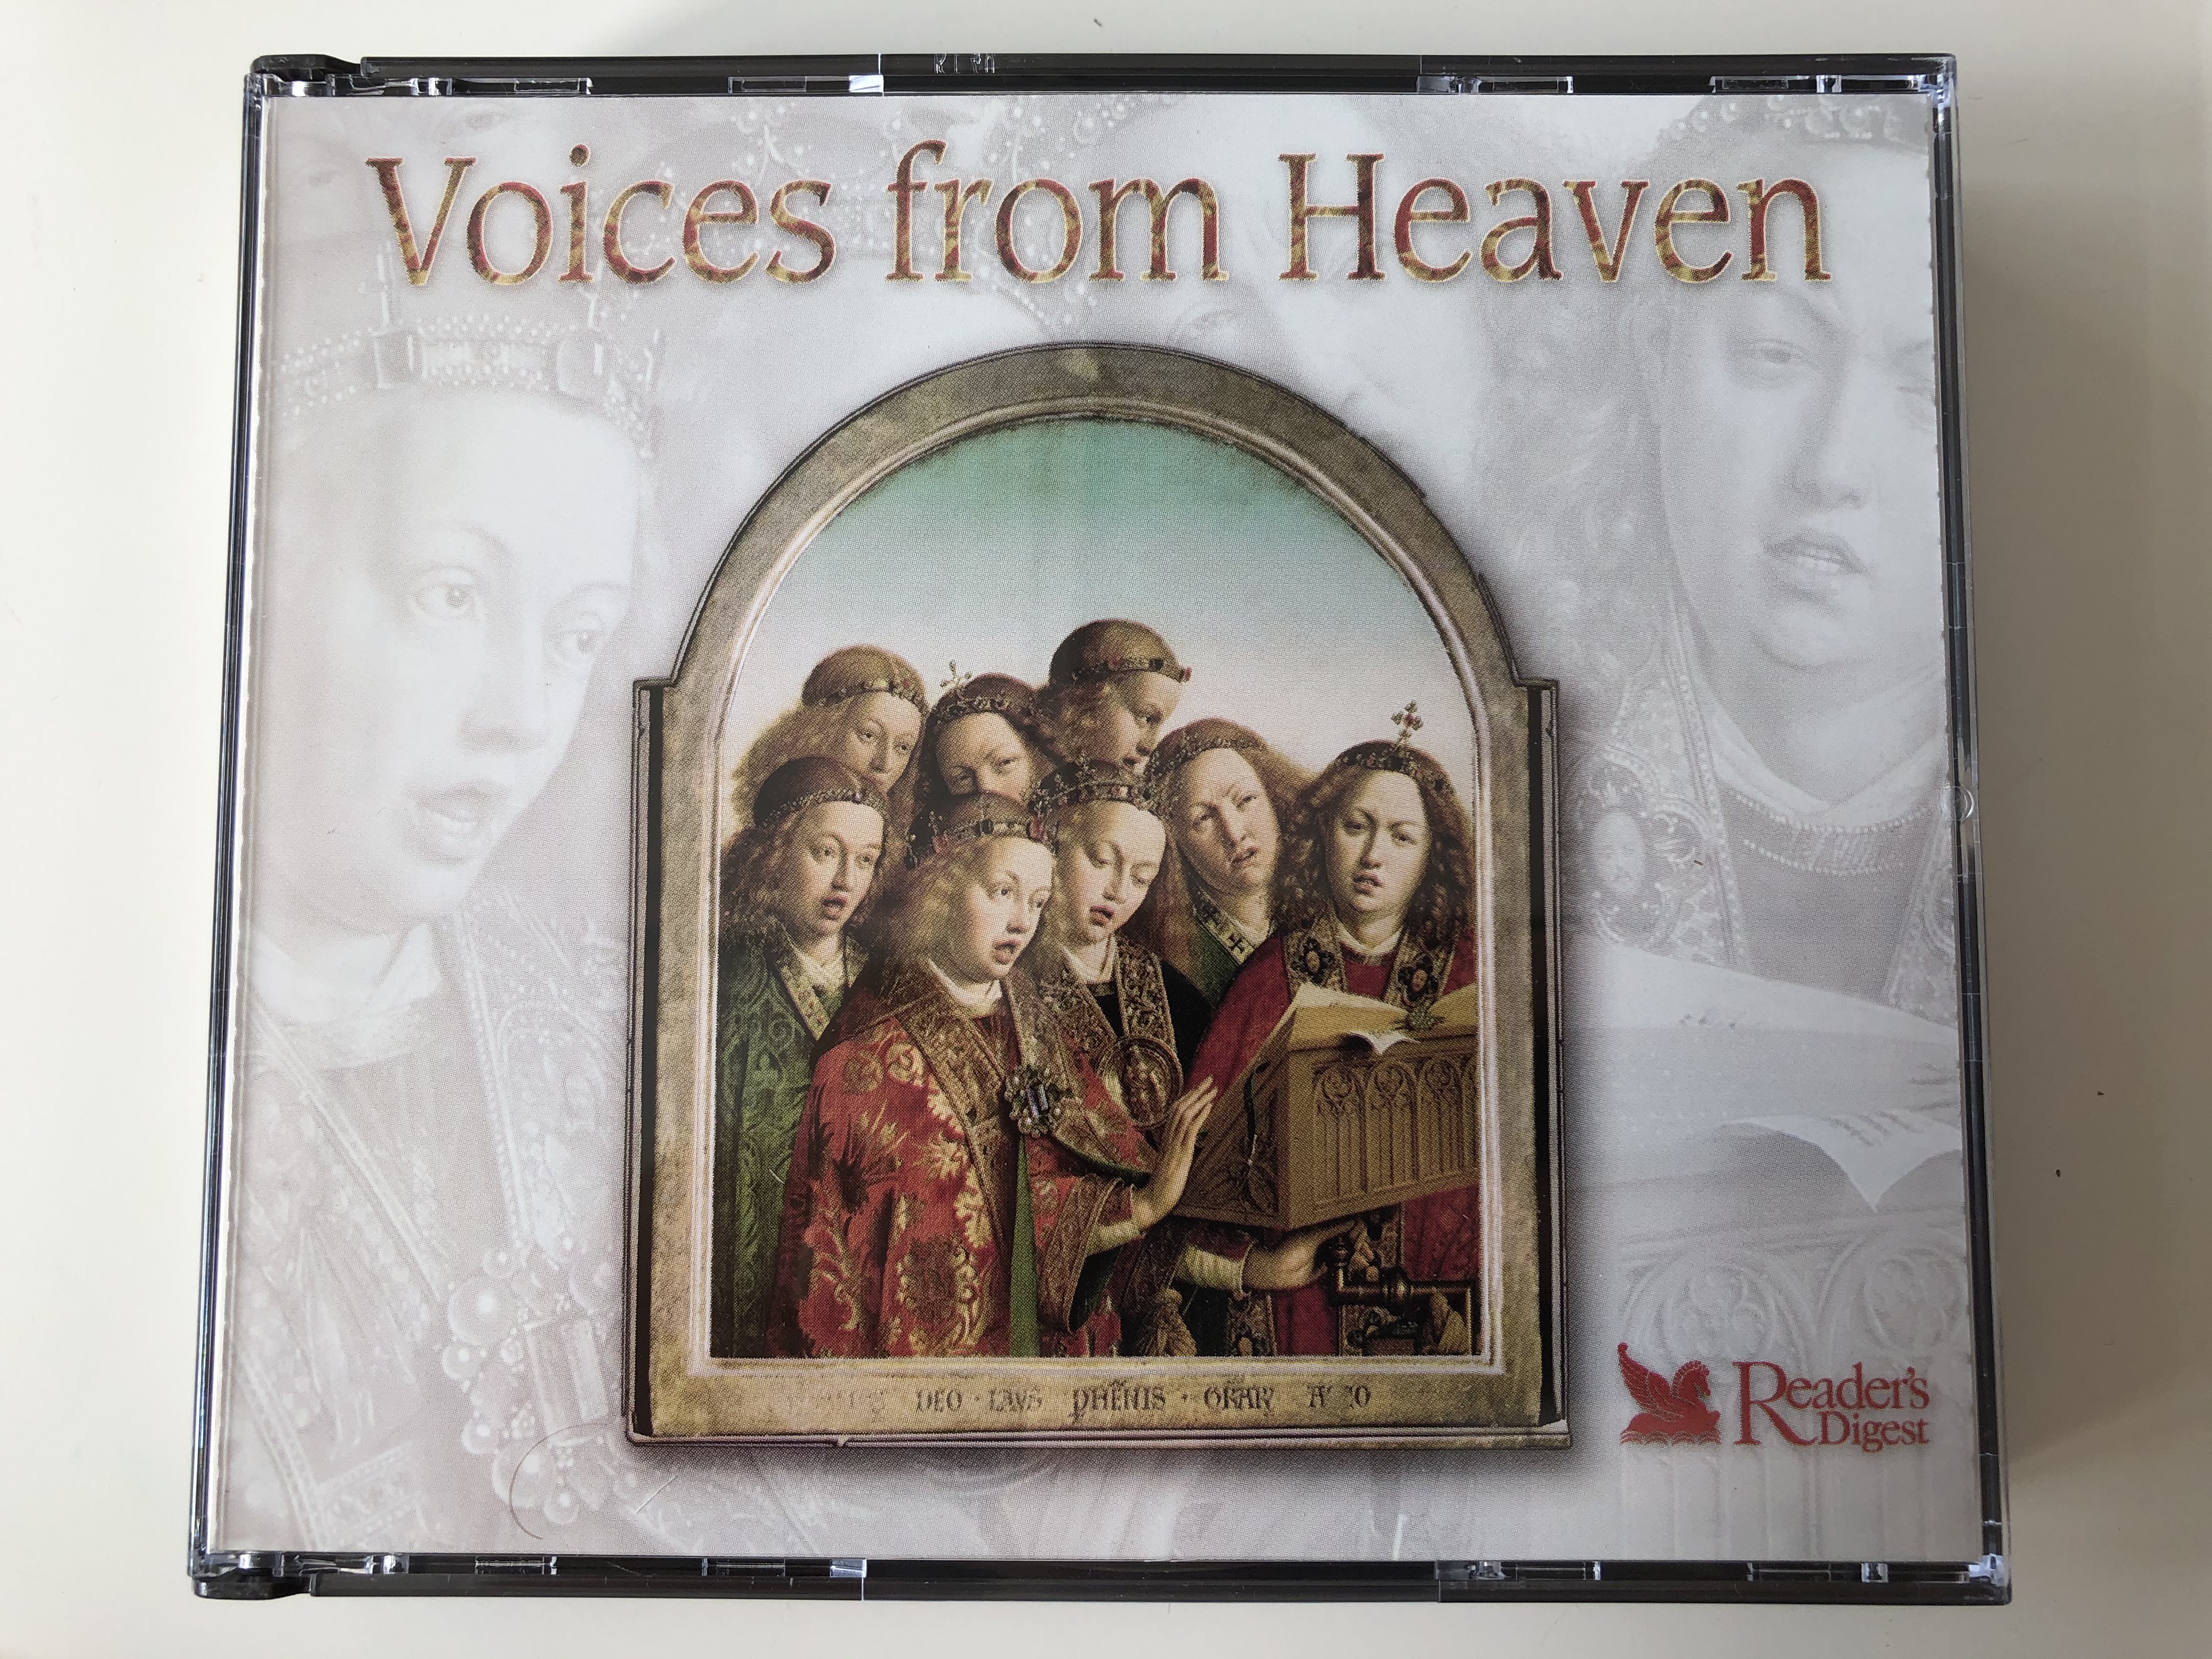 voices-from-heaven-reader-s-digest-3x-audio-cd-2002-b-03-001-bb-1-.jpg